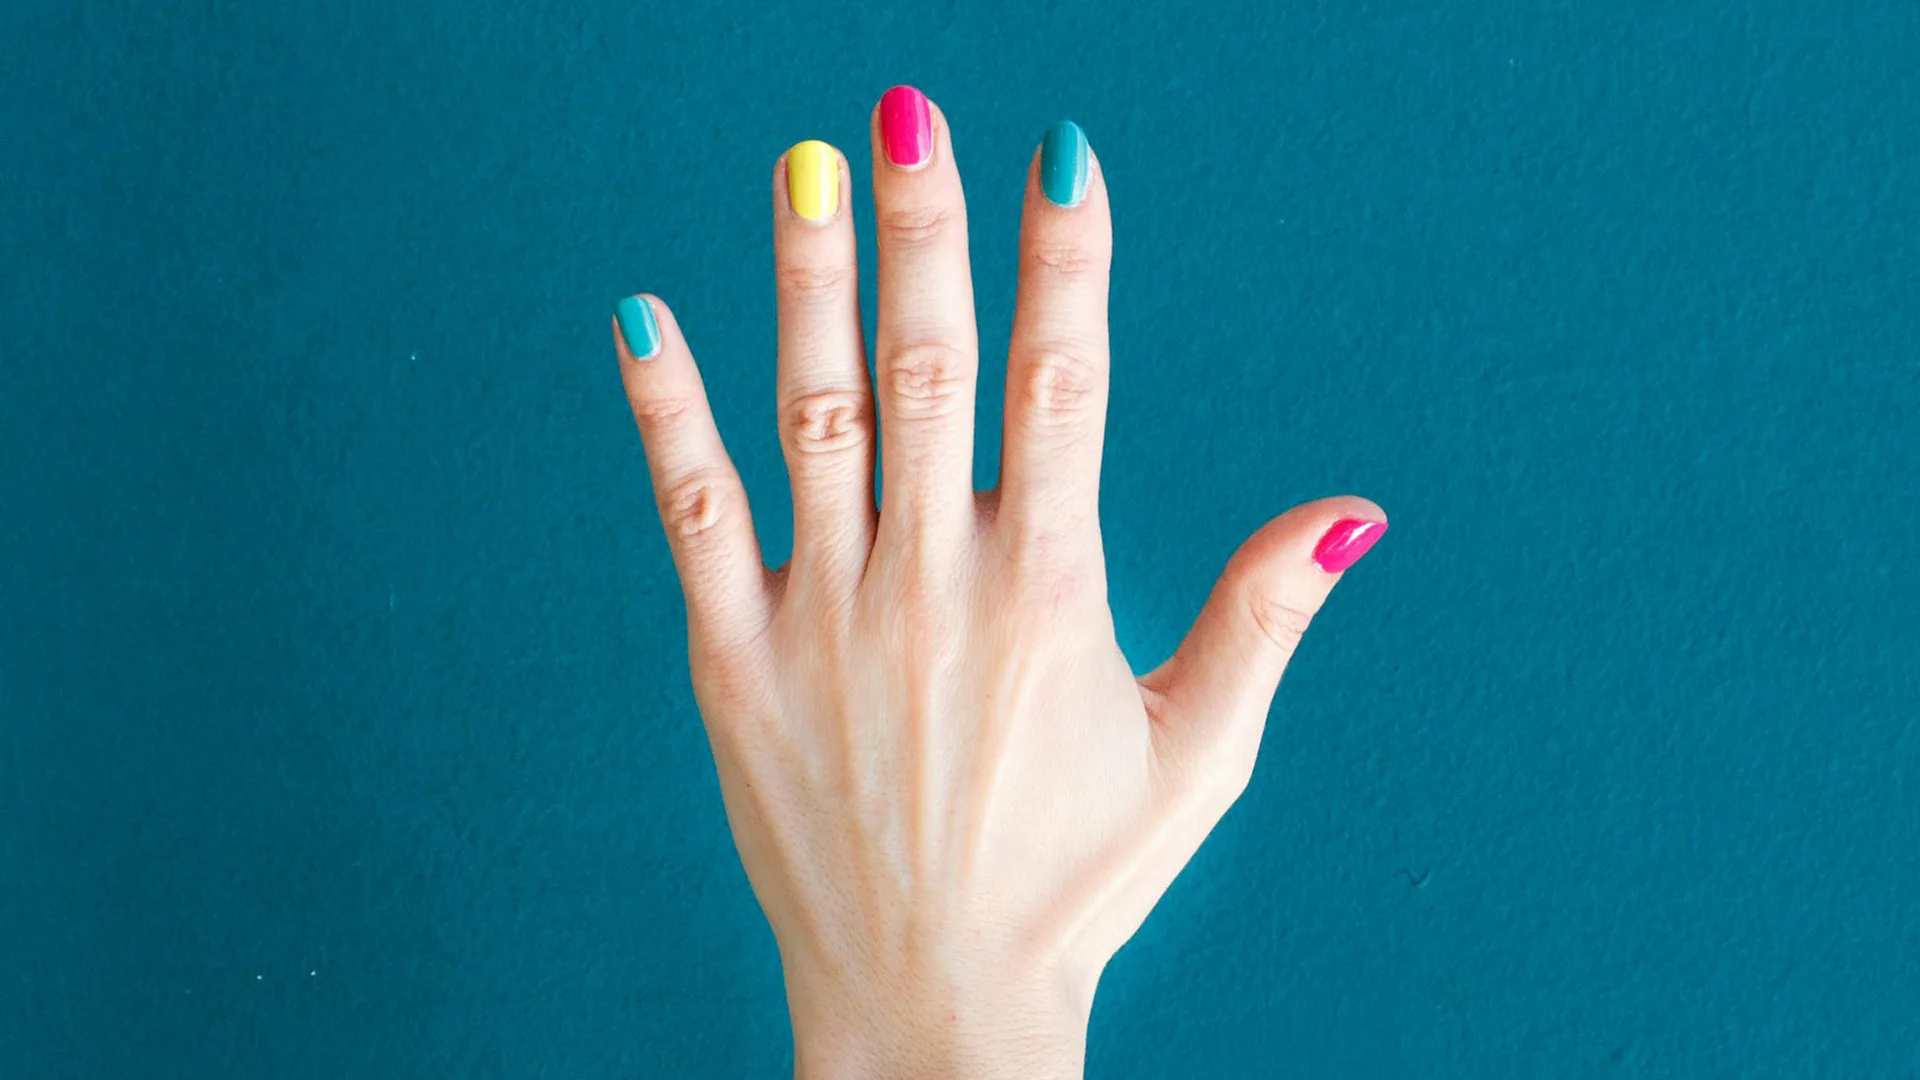 A hand with fingernails painted in blue, yellow and pink held out against a blue background